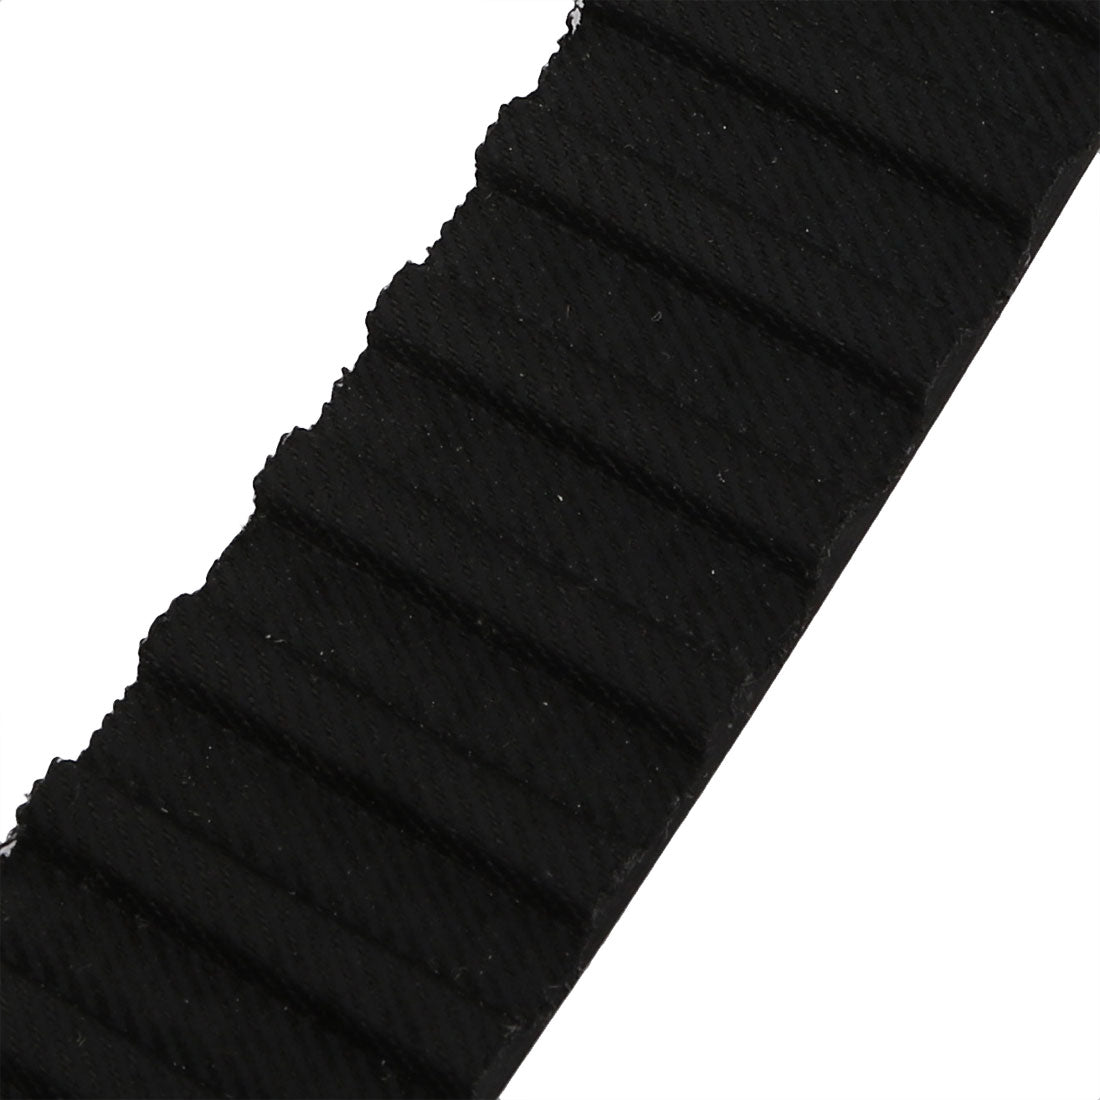 uxcell Uxcell 367L 98 Teeth 25mm Width 9.525mm Pitch Rubber Timing Belt for Stepper Motor